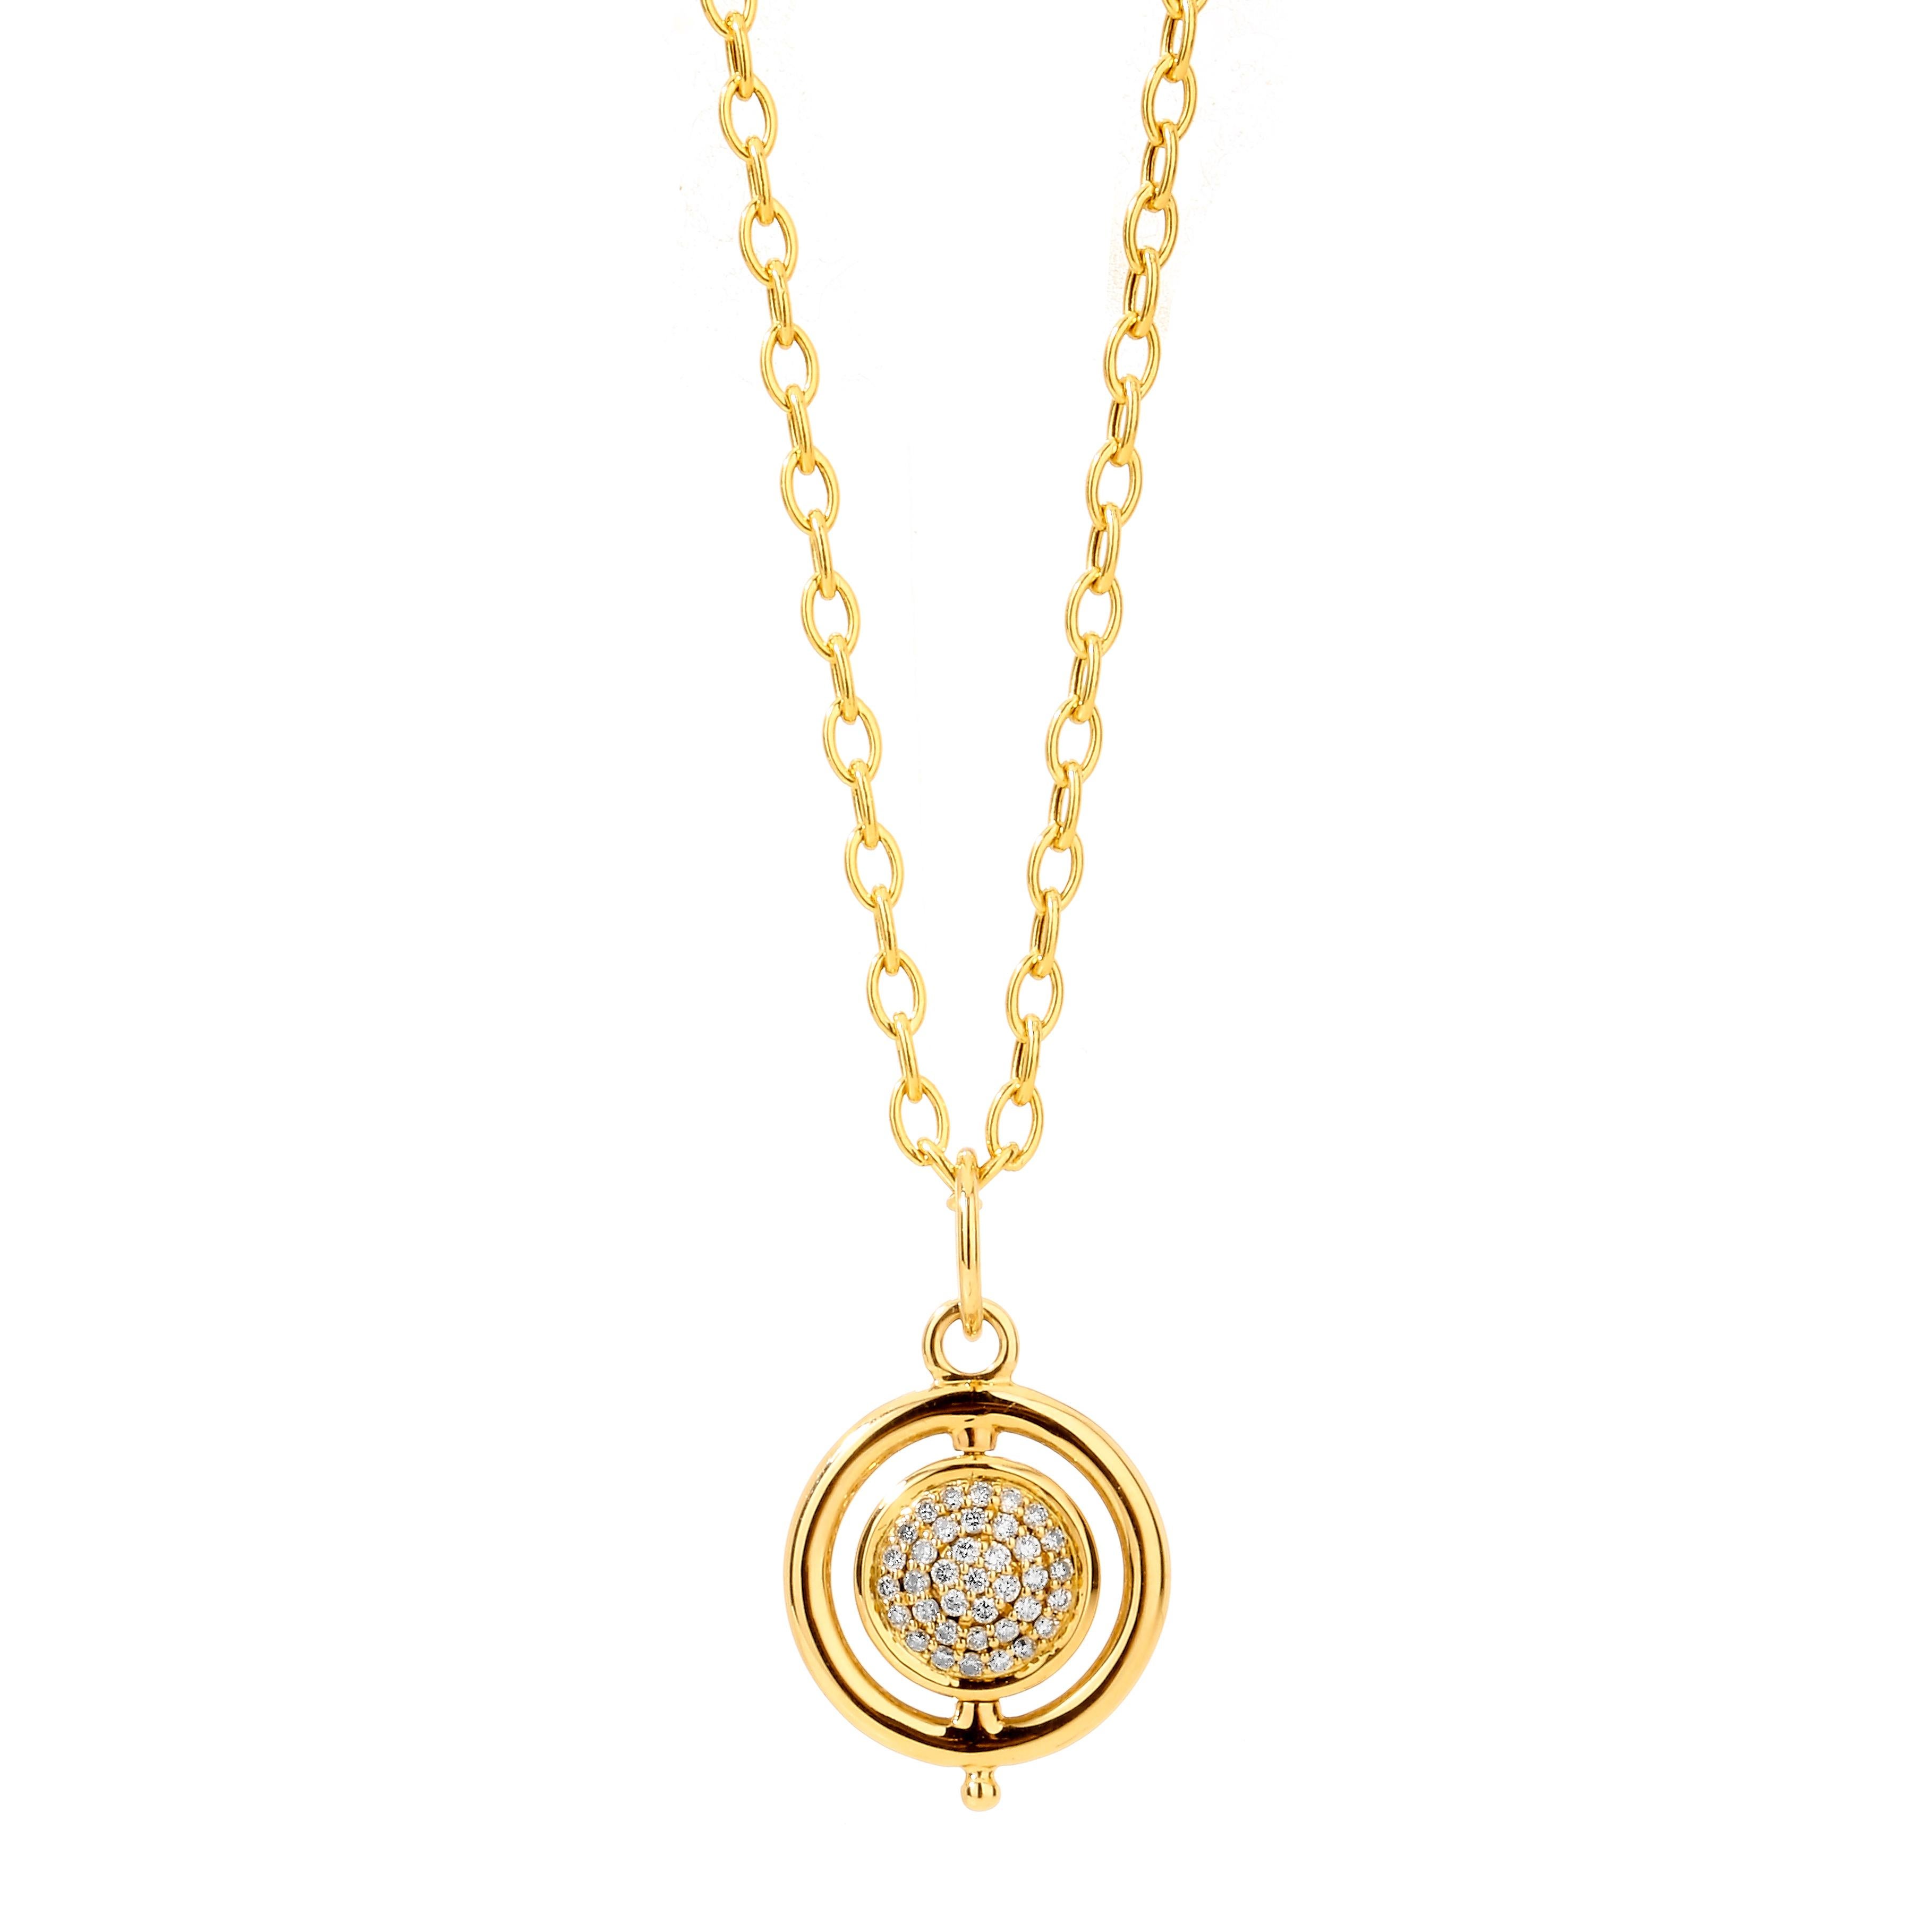 Created in 18 karat yellow gold
Reversible pendant
Emeralds 0.20 carat approx.
Diamonds 0.35 carat approx.
Swivel mechanism 
Limited edition
Chain sold separately 

Crafted from 18 karat yellow gold, this limited edition, swivel-mechanism pendant is